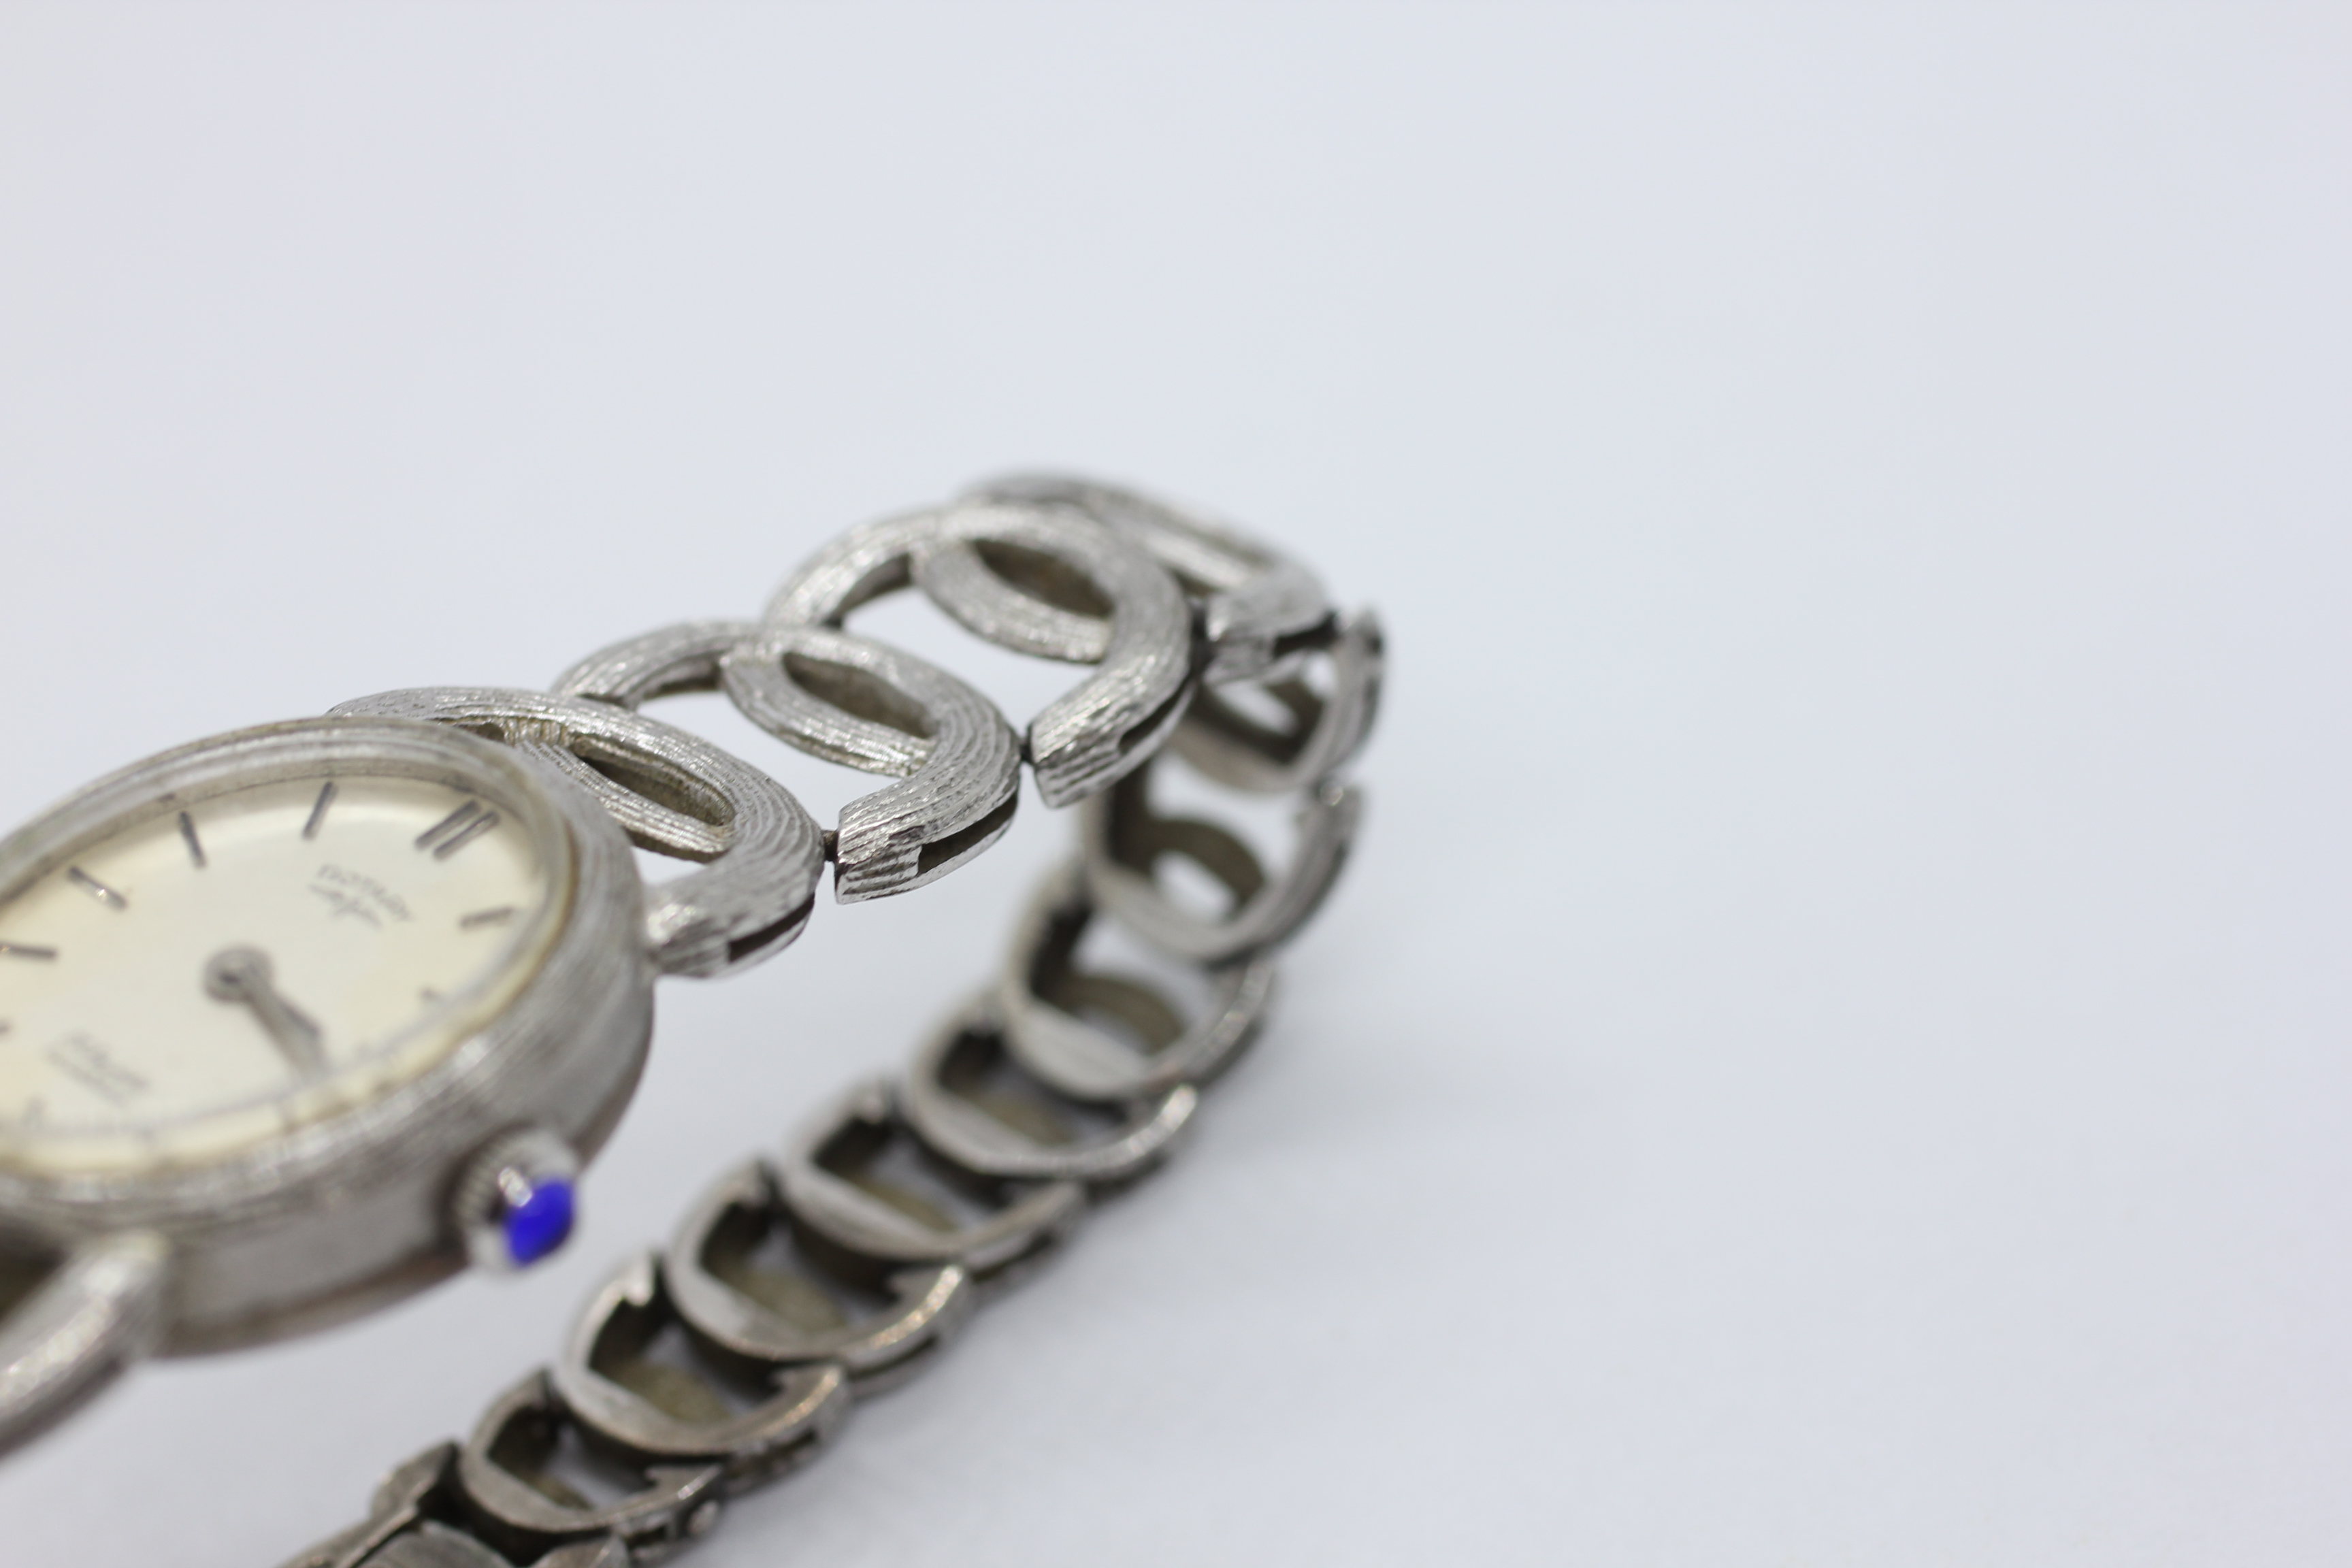 A LADIES SILVER ROTARY WRIST WATCH ON LINKED BRACELET. - Image 5 of 9